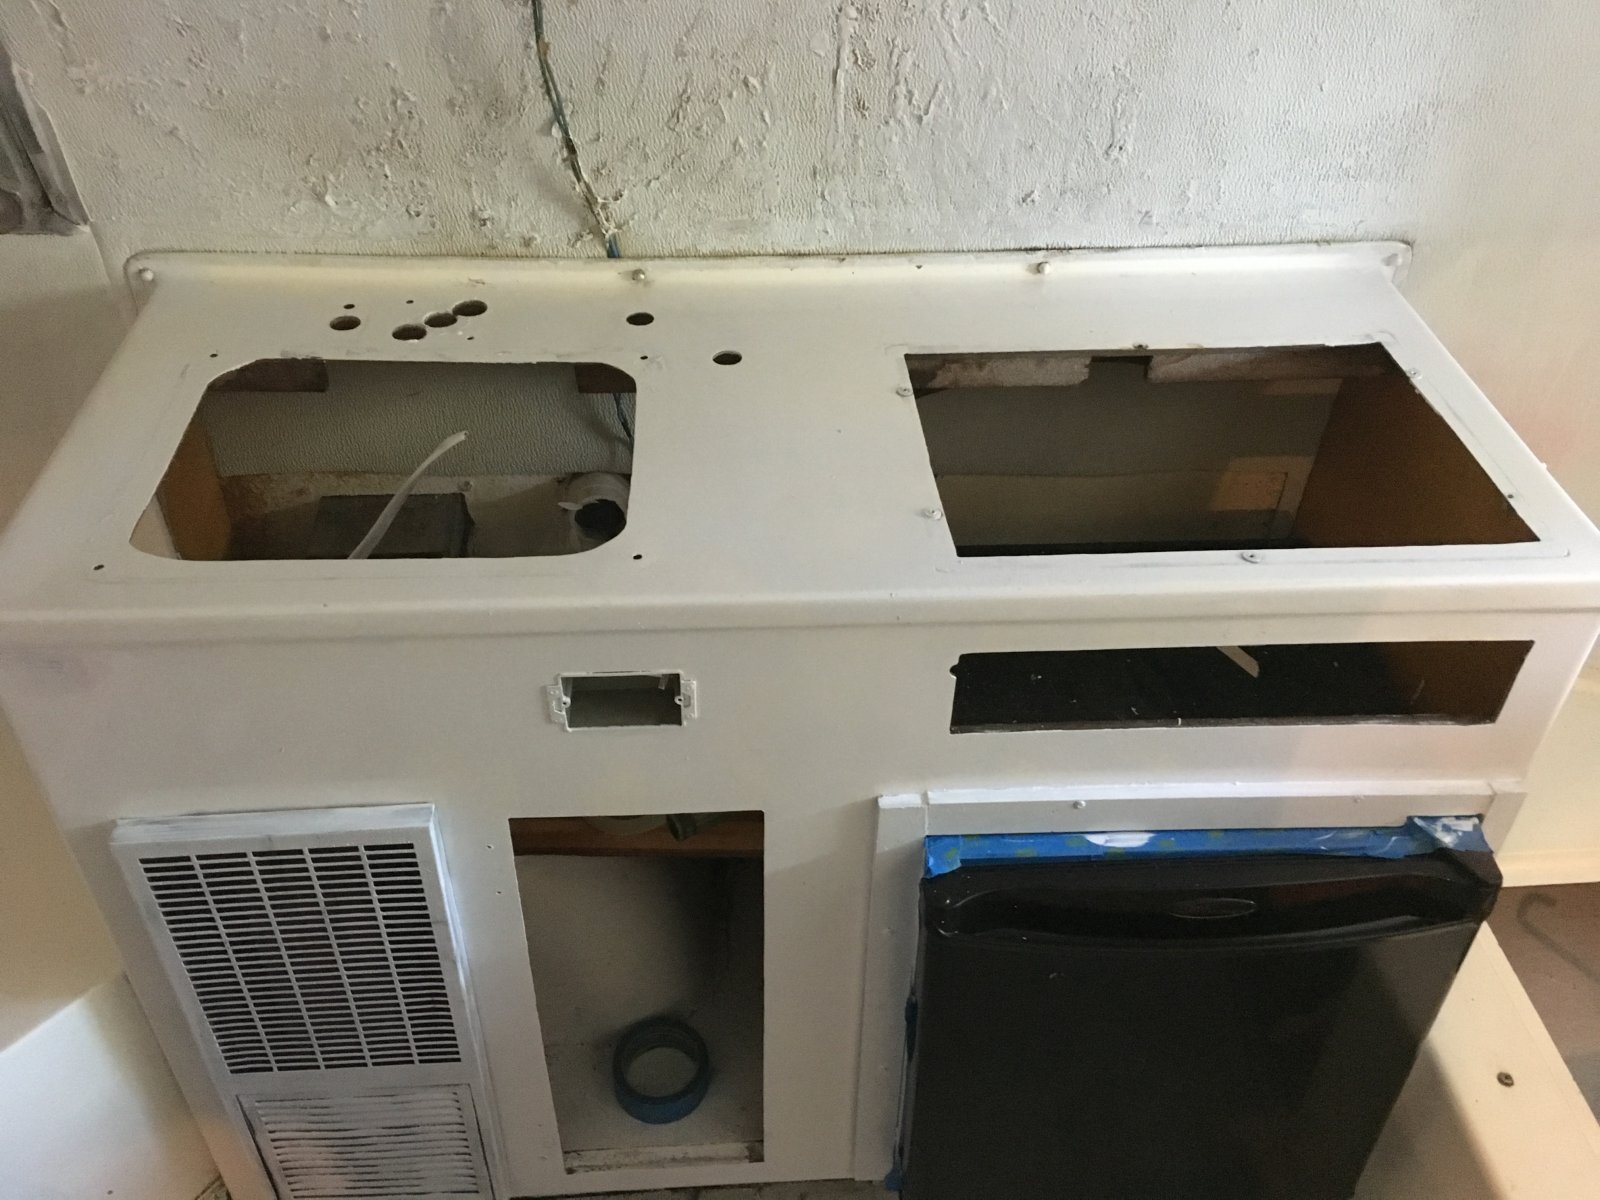 Here the kitchen unit is nearly completely stripped down, with the original sink and stove gone. You can also see where I filled in some more holes on the front. I didn't need to fill the ones on top because I was building a new countertop. 